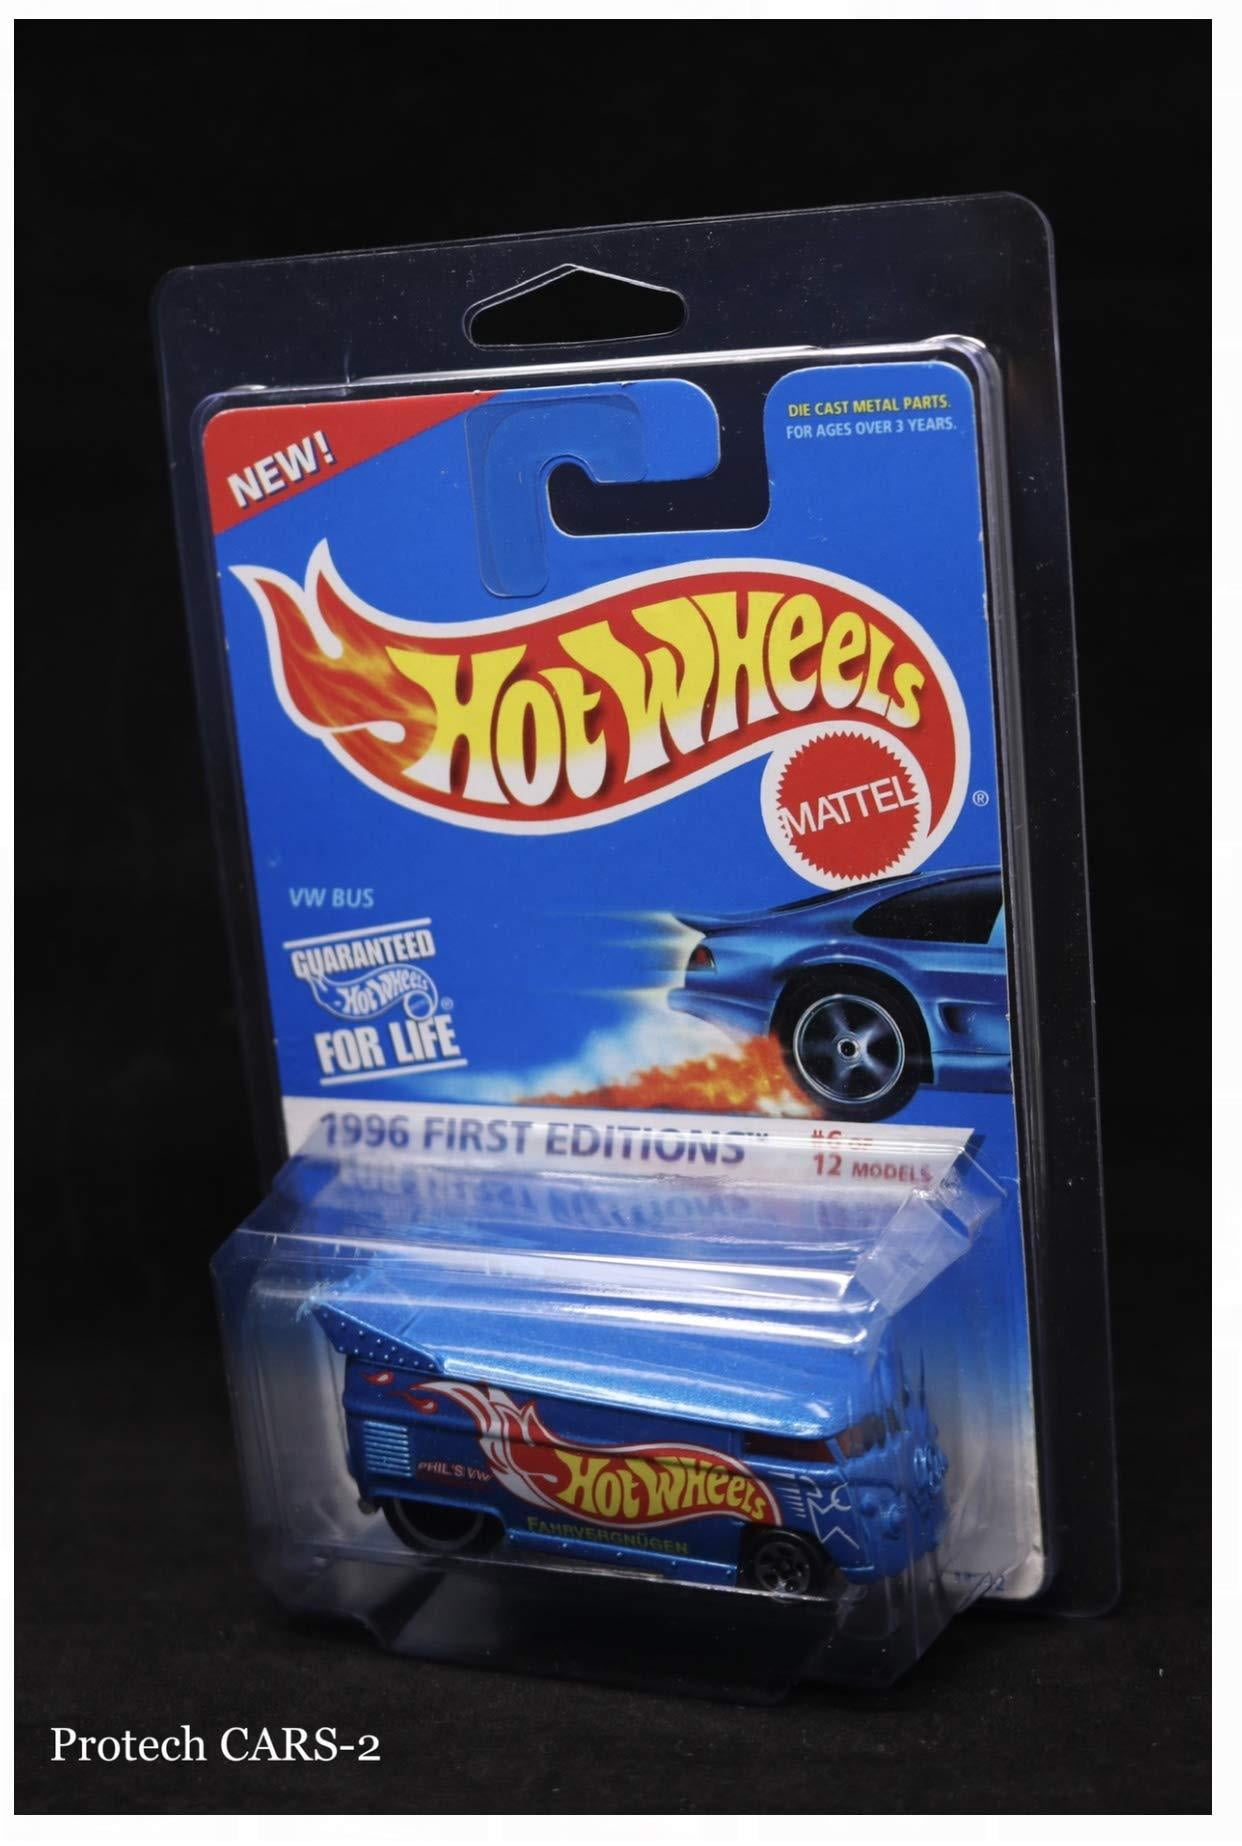 Display Car Case for carded Hot Wheels 4.25" x 6.5" x 1.75" Protech Storage 